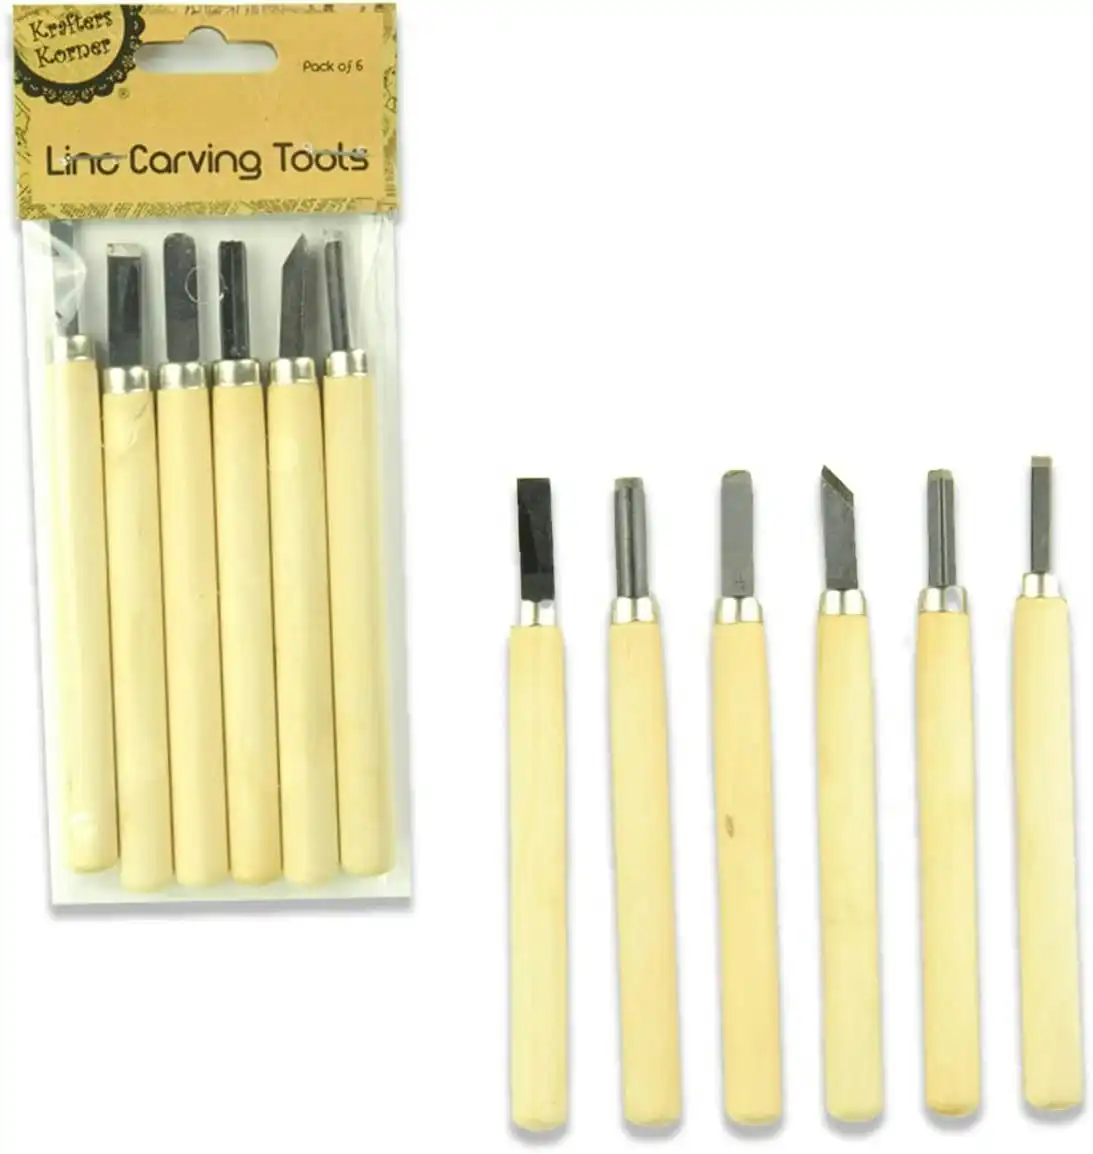 [6Pce] Krafters Korner Wooden Lino Carving Tools - 6 Different Carving Tools With Steel Nozzles